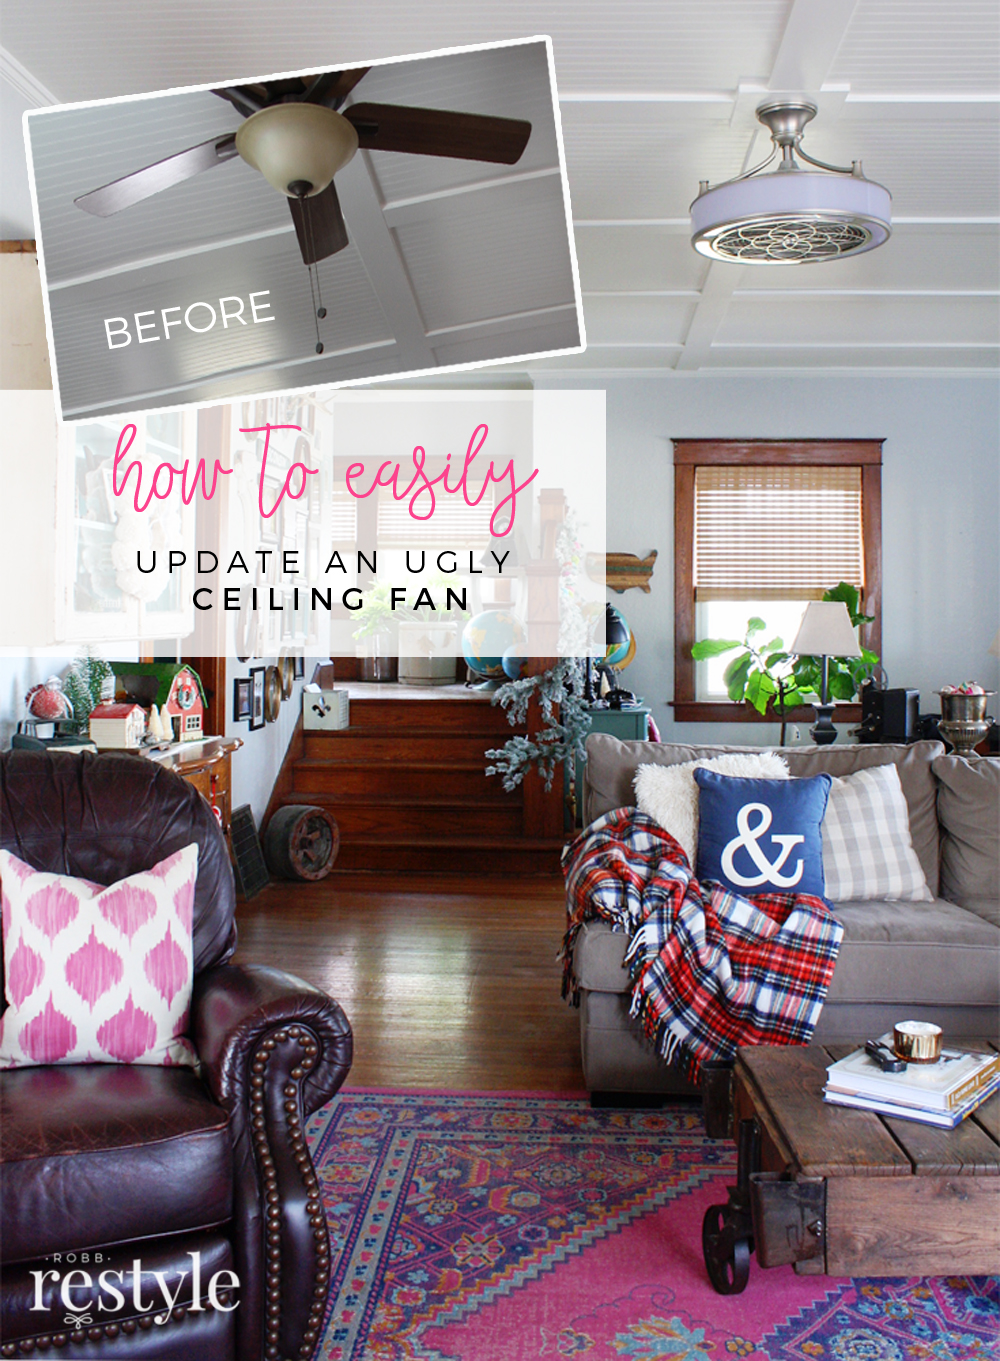 How to Easily Upgrade Your Ugly Ceiling Fan